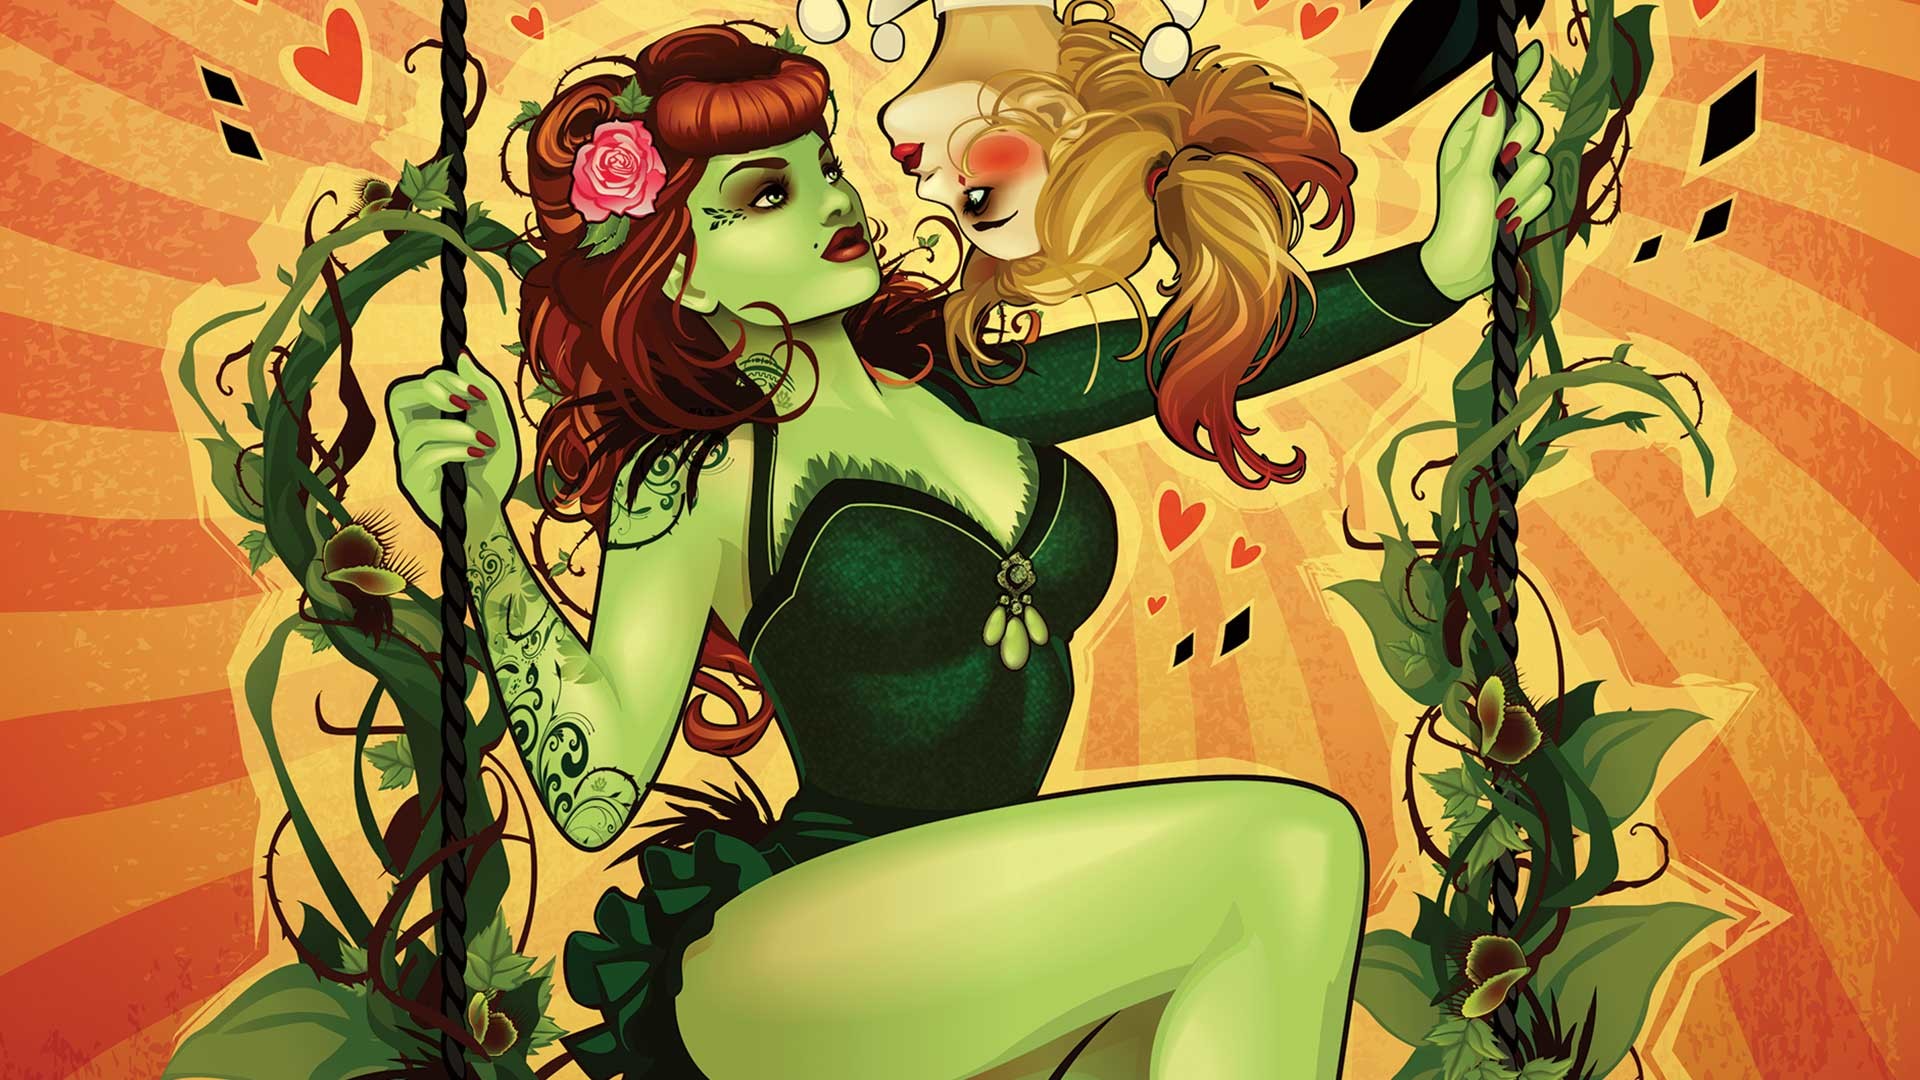 1920x1080 DC COMICS: BOMBSHELLS #27 cover by Ant Lucia